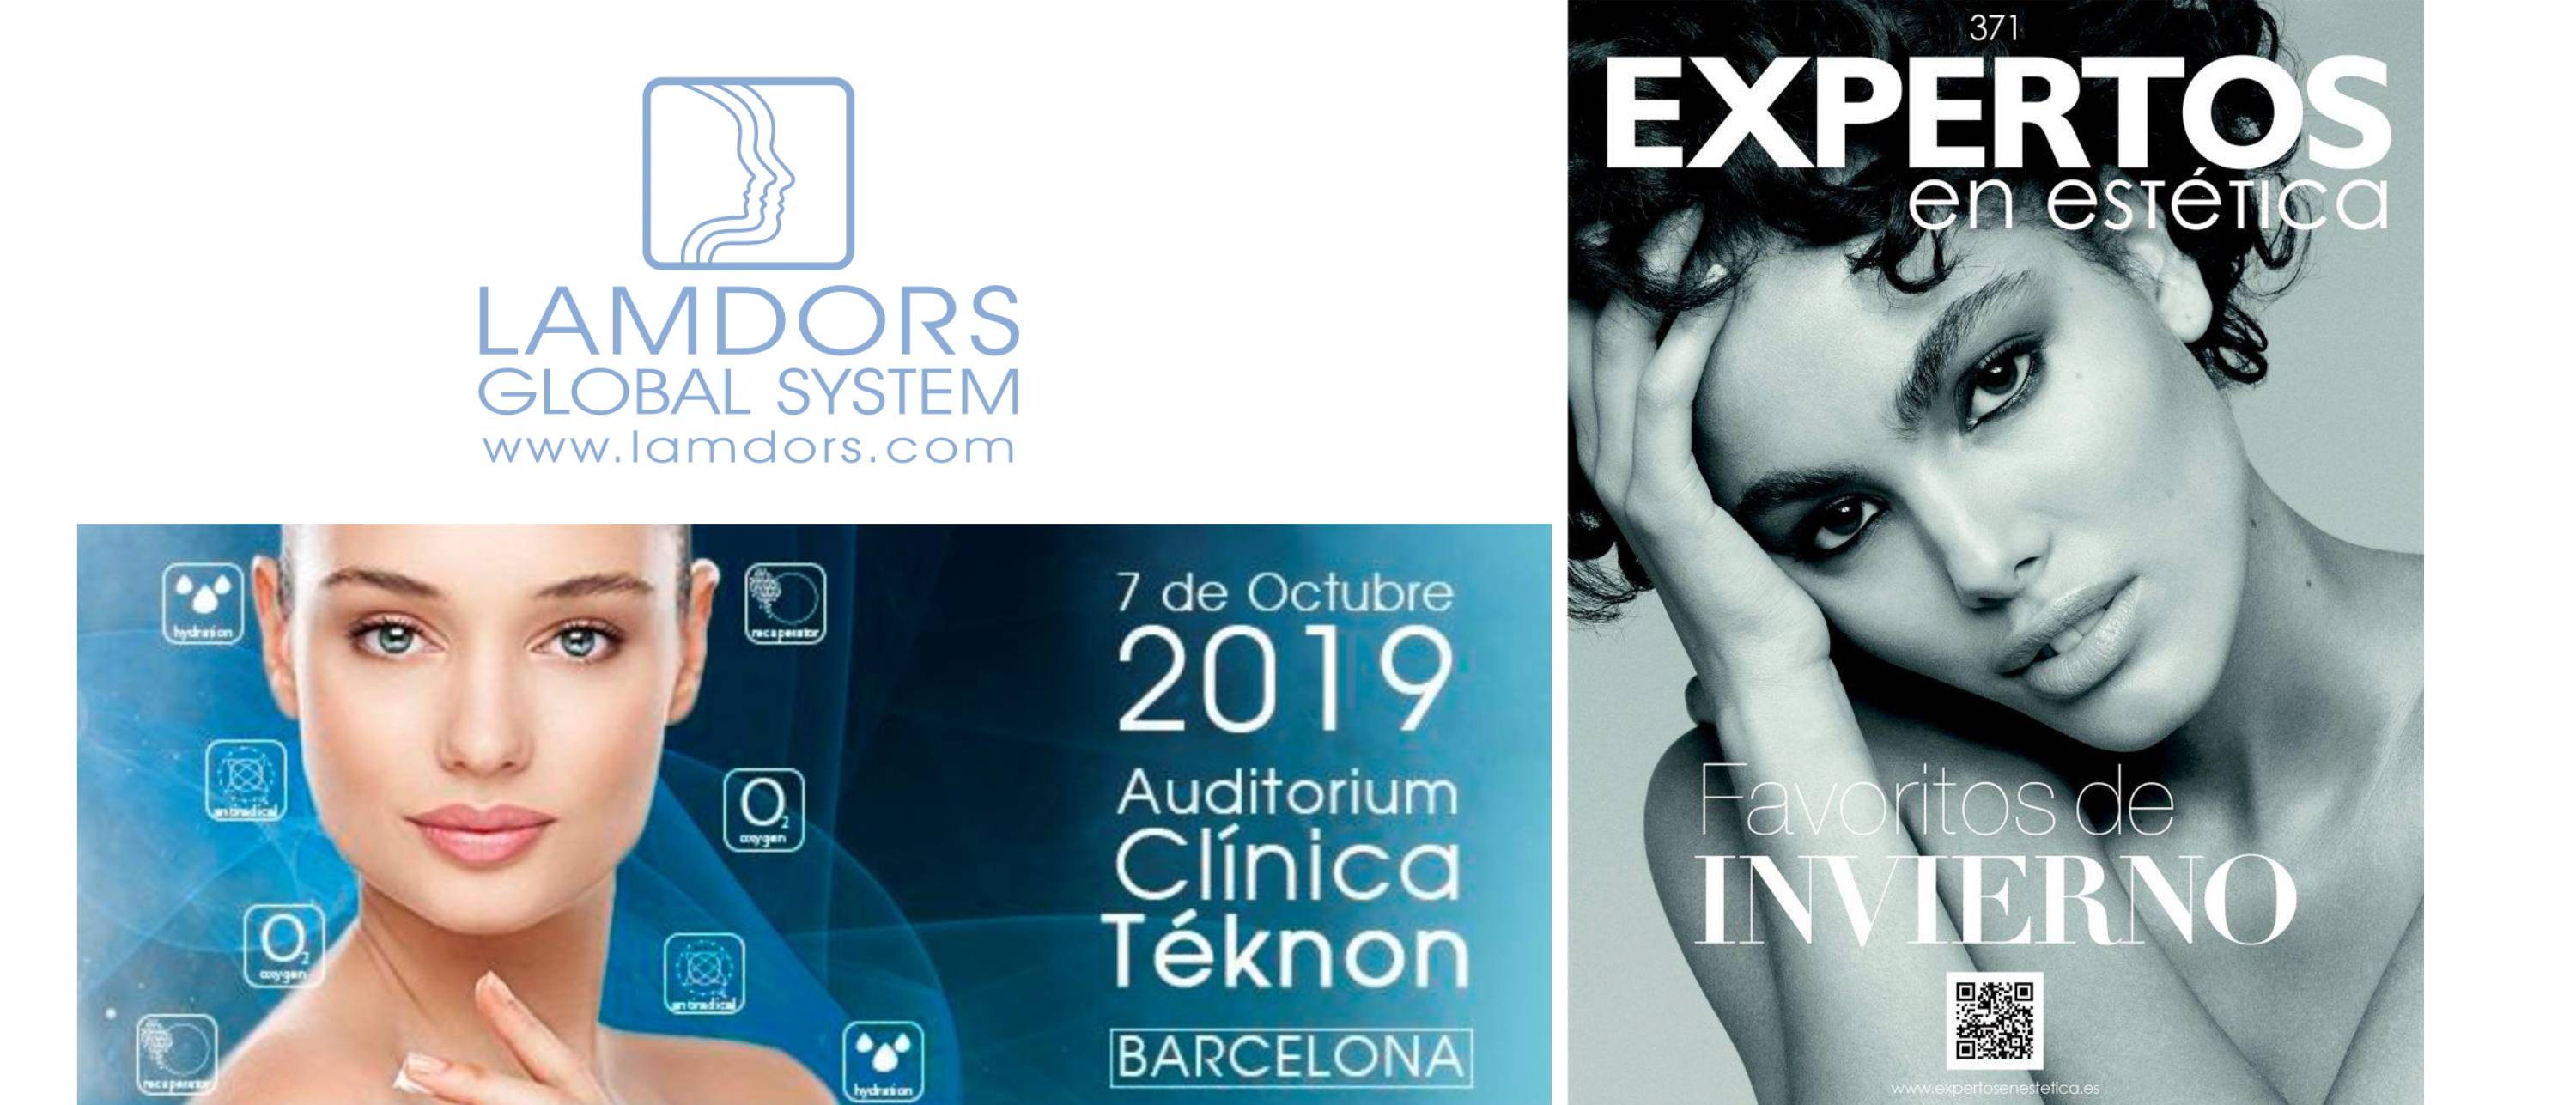 Lamdors will show the latest trends in Scientific Aesthetics at a symposium at the Teknon Clinic